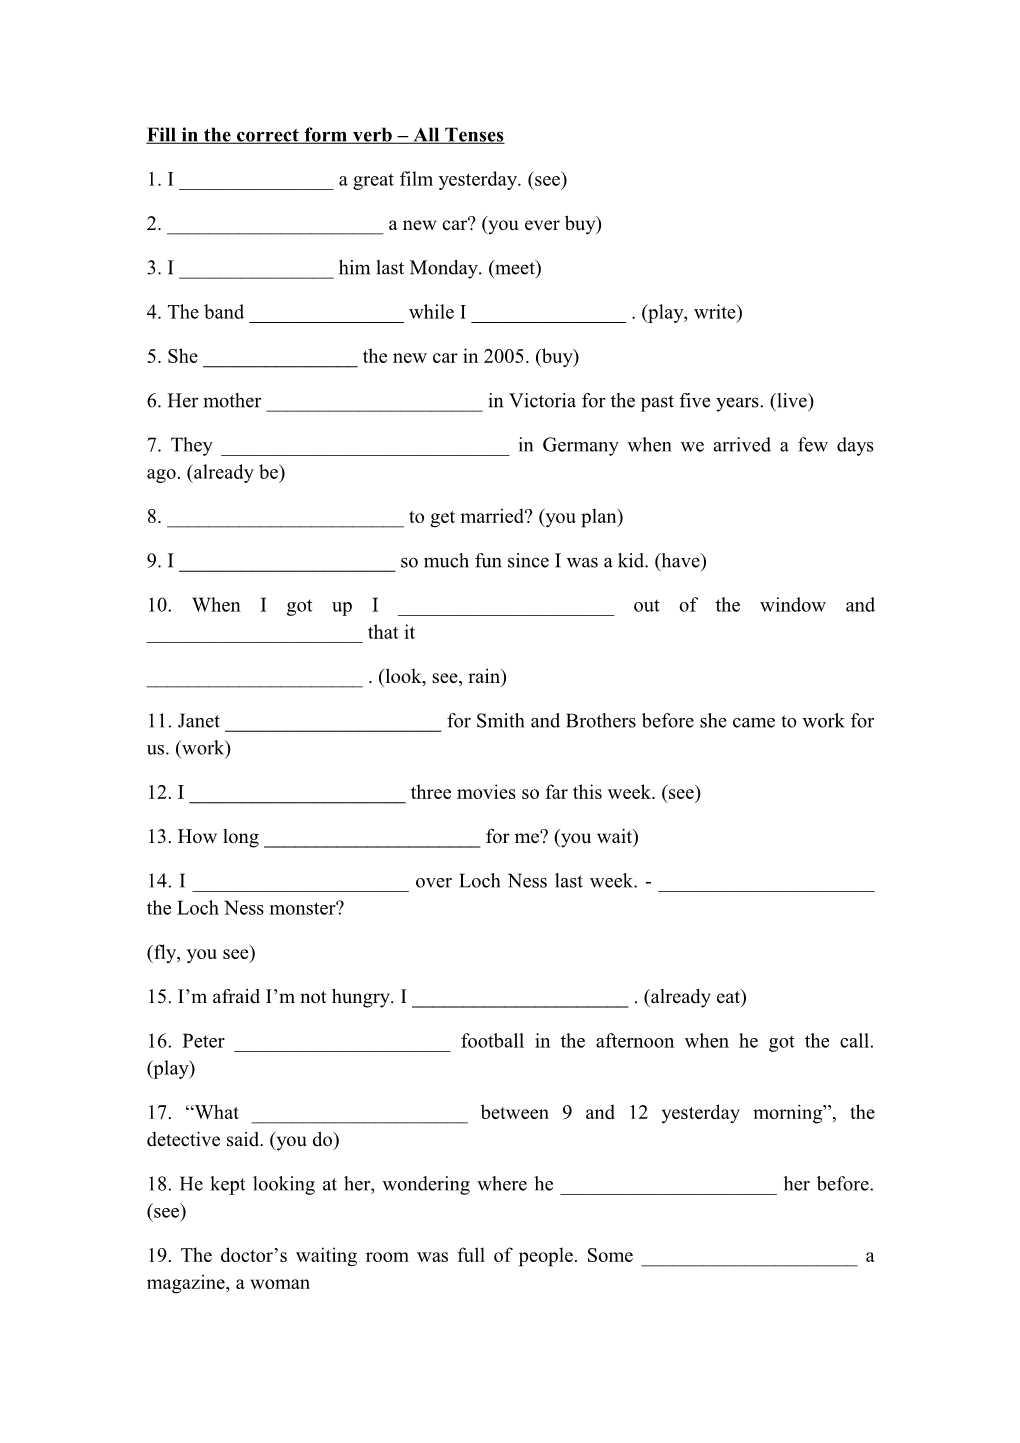 Fill in the Correct Form Verb All Tenses